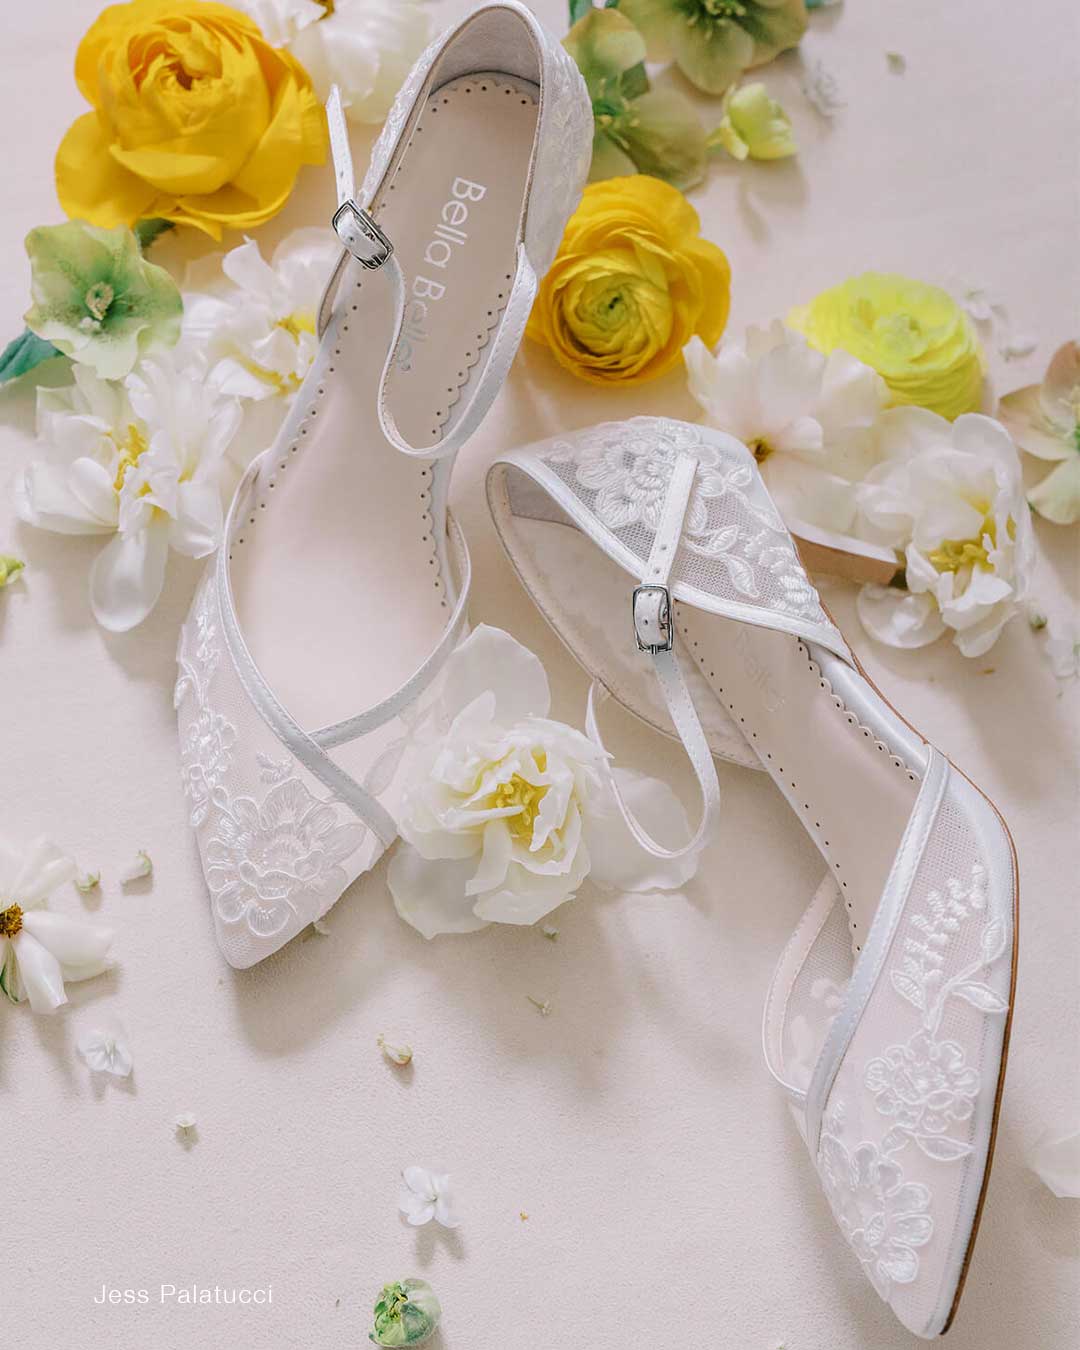 The 15 best wedding shoes for brides in 2023